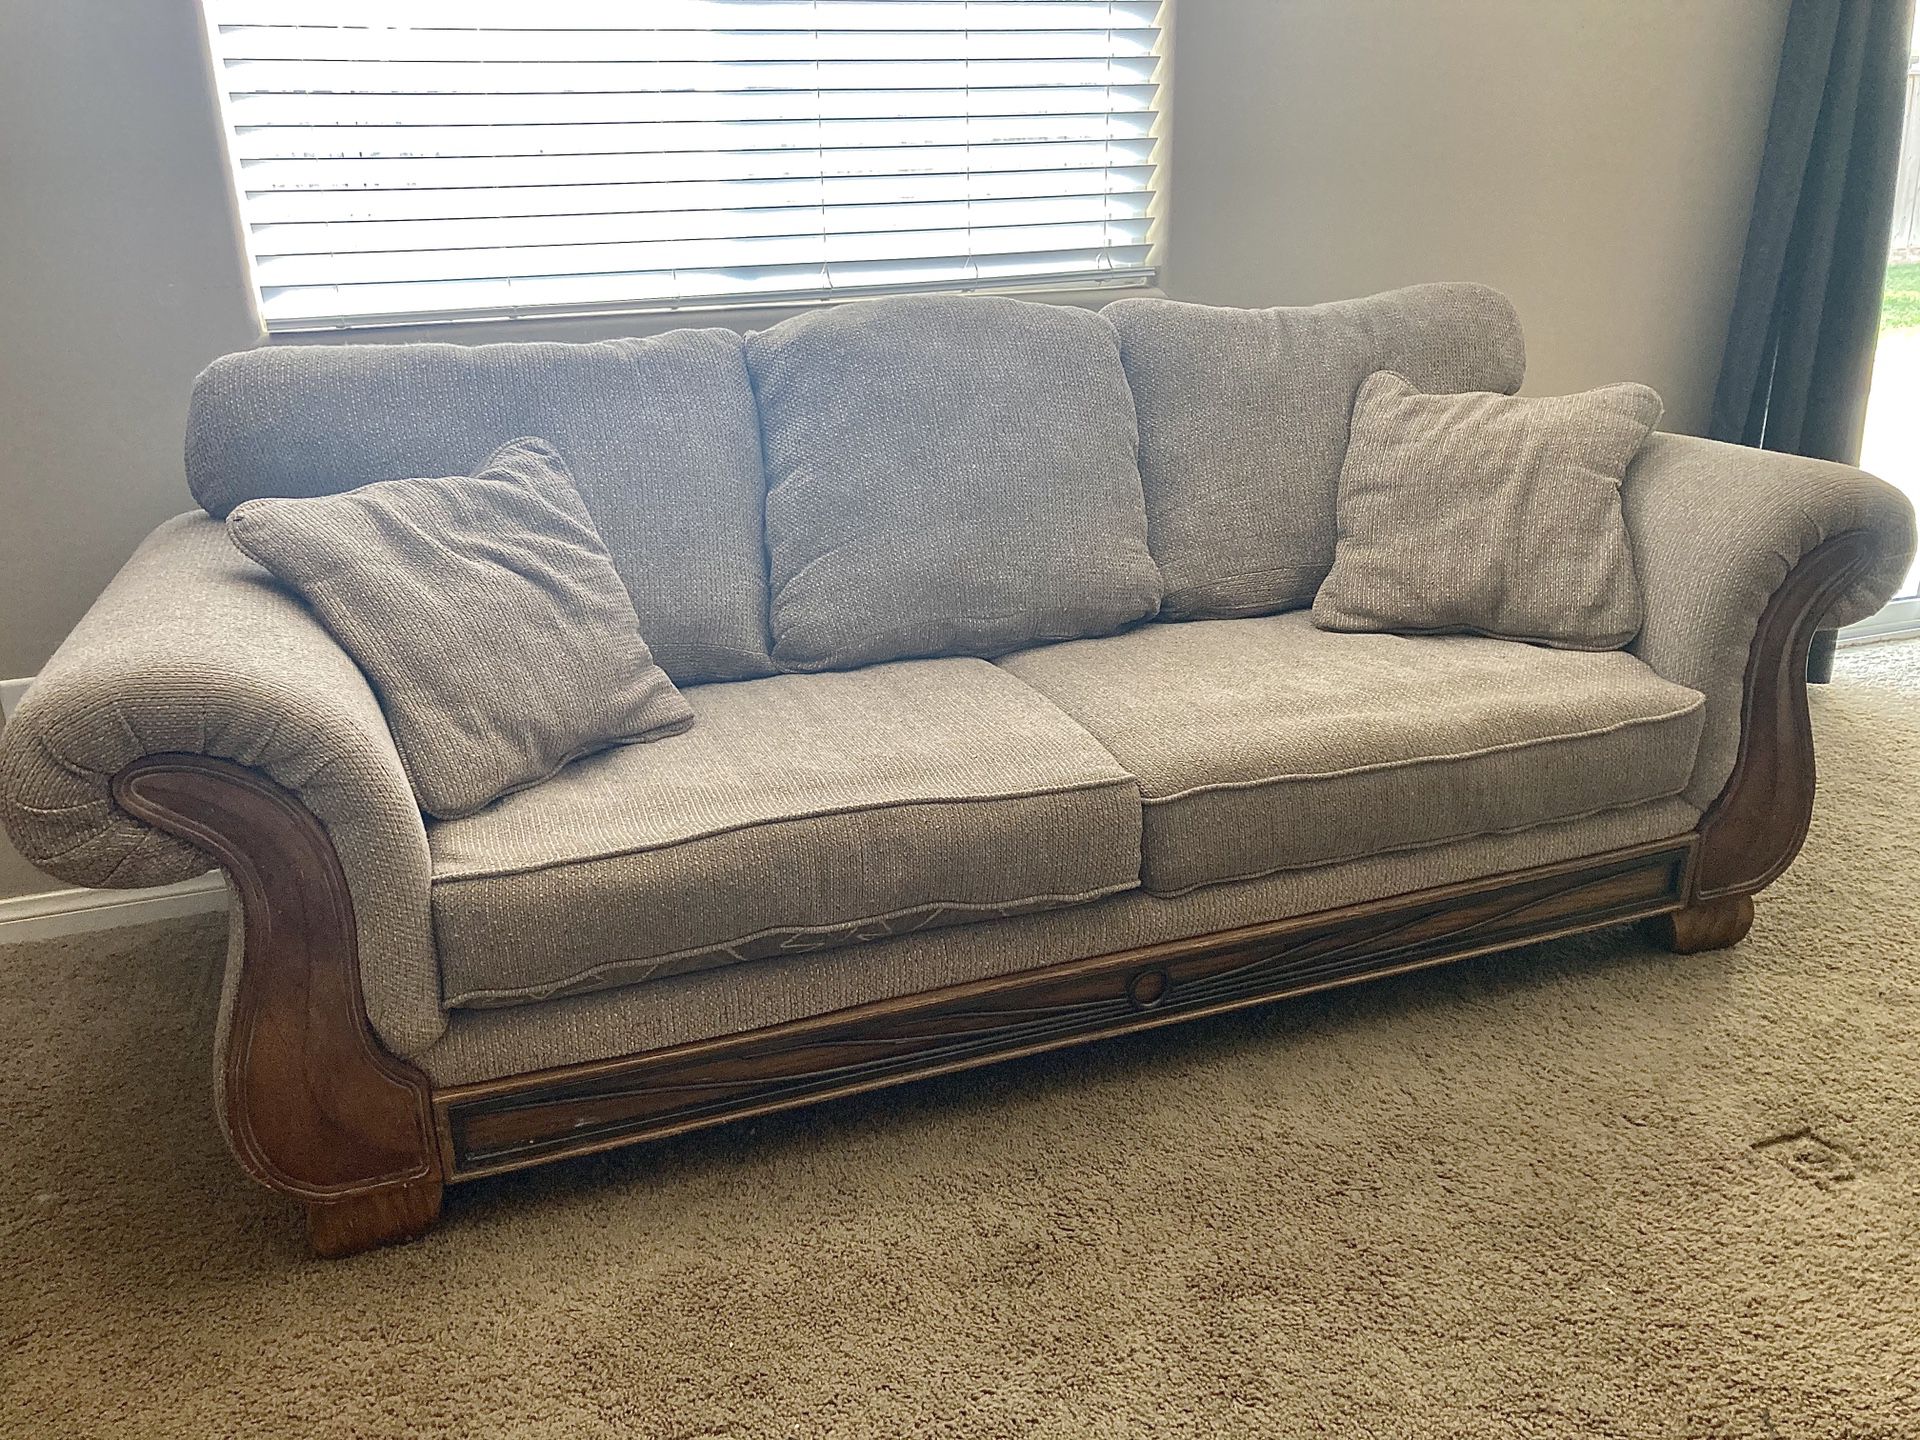 Free Couch & Chair